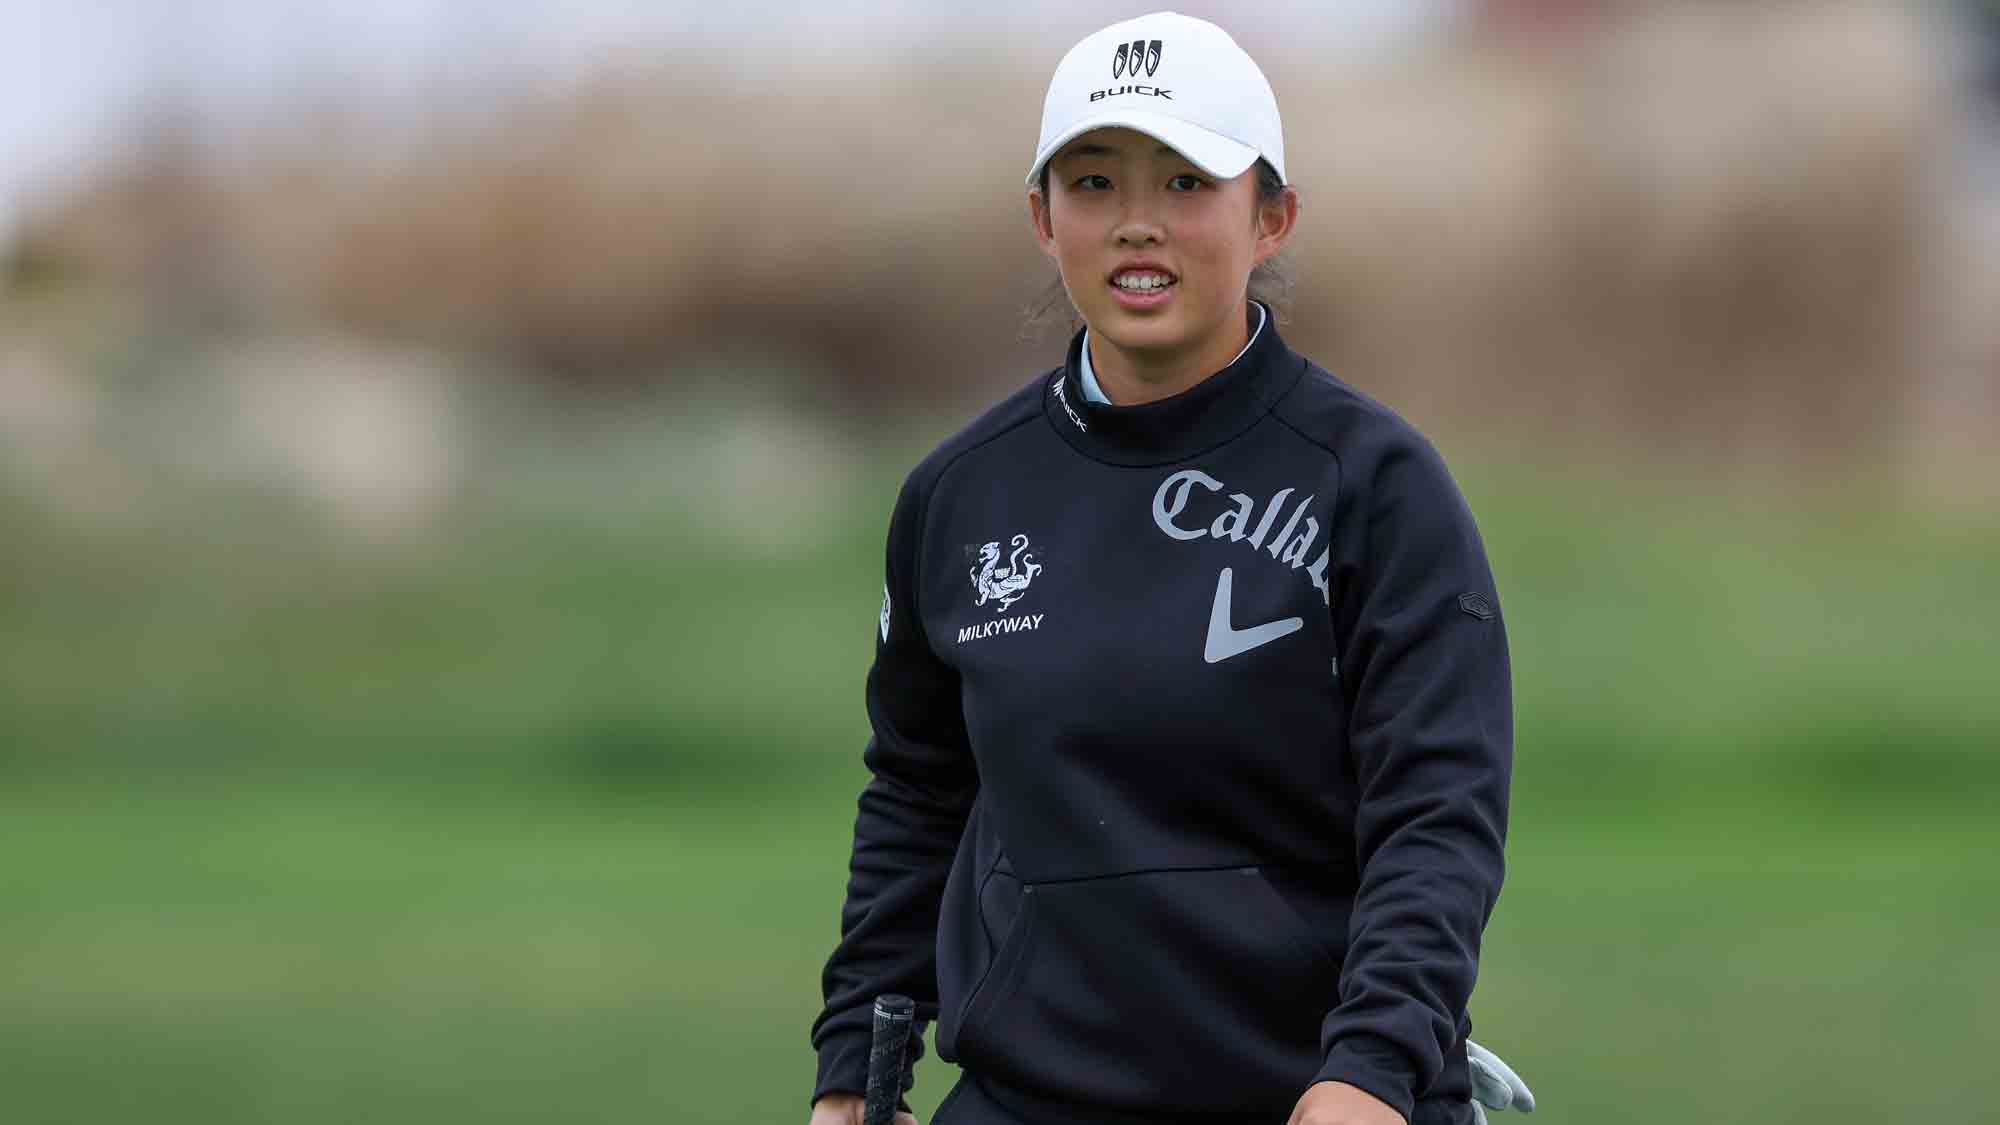 Five Things to Know About The Amundi Evian Championship LPGA Ladies